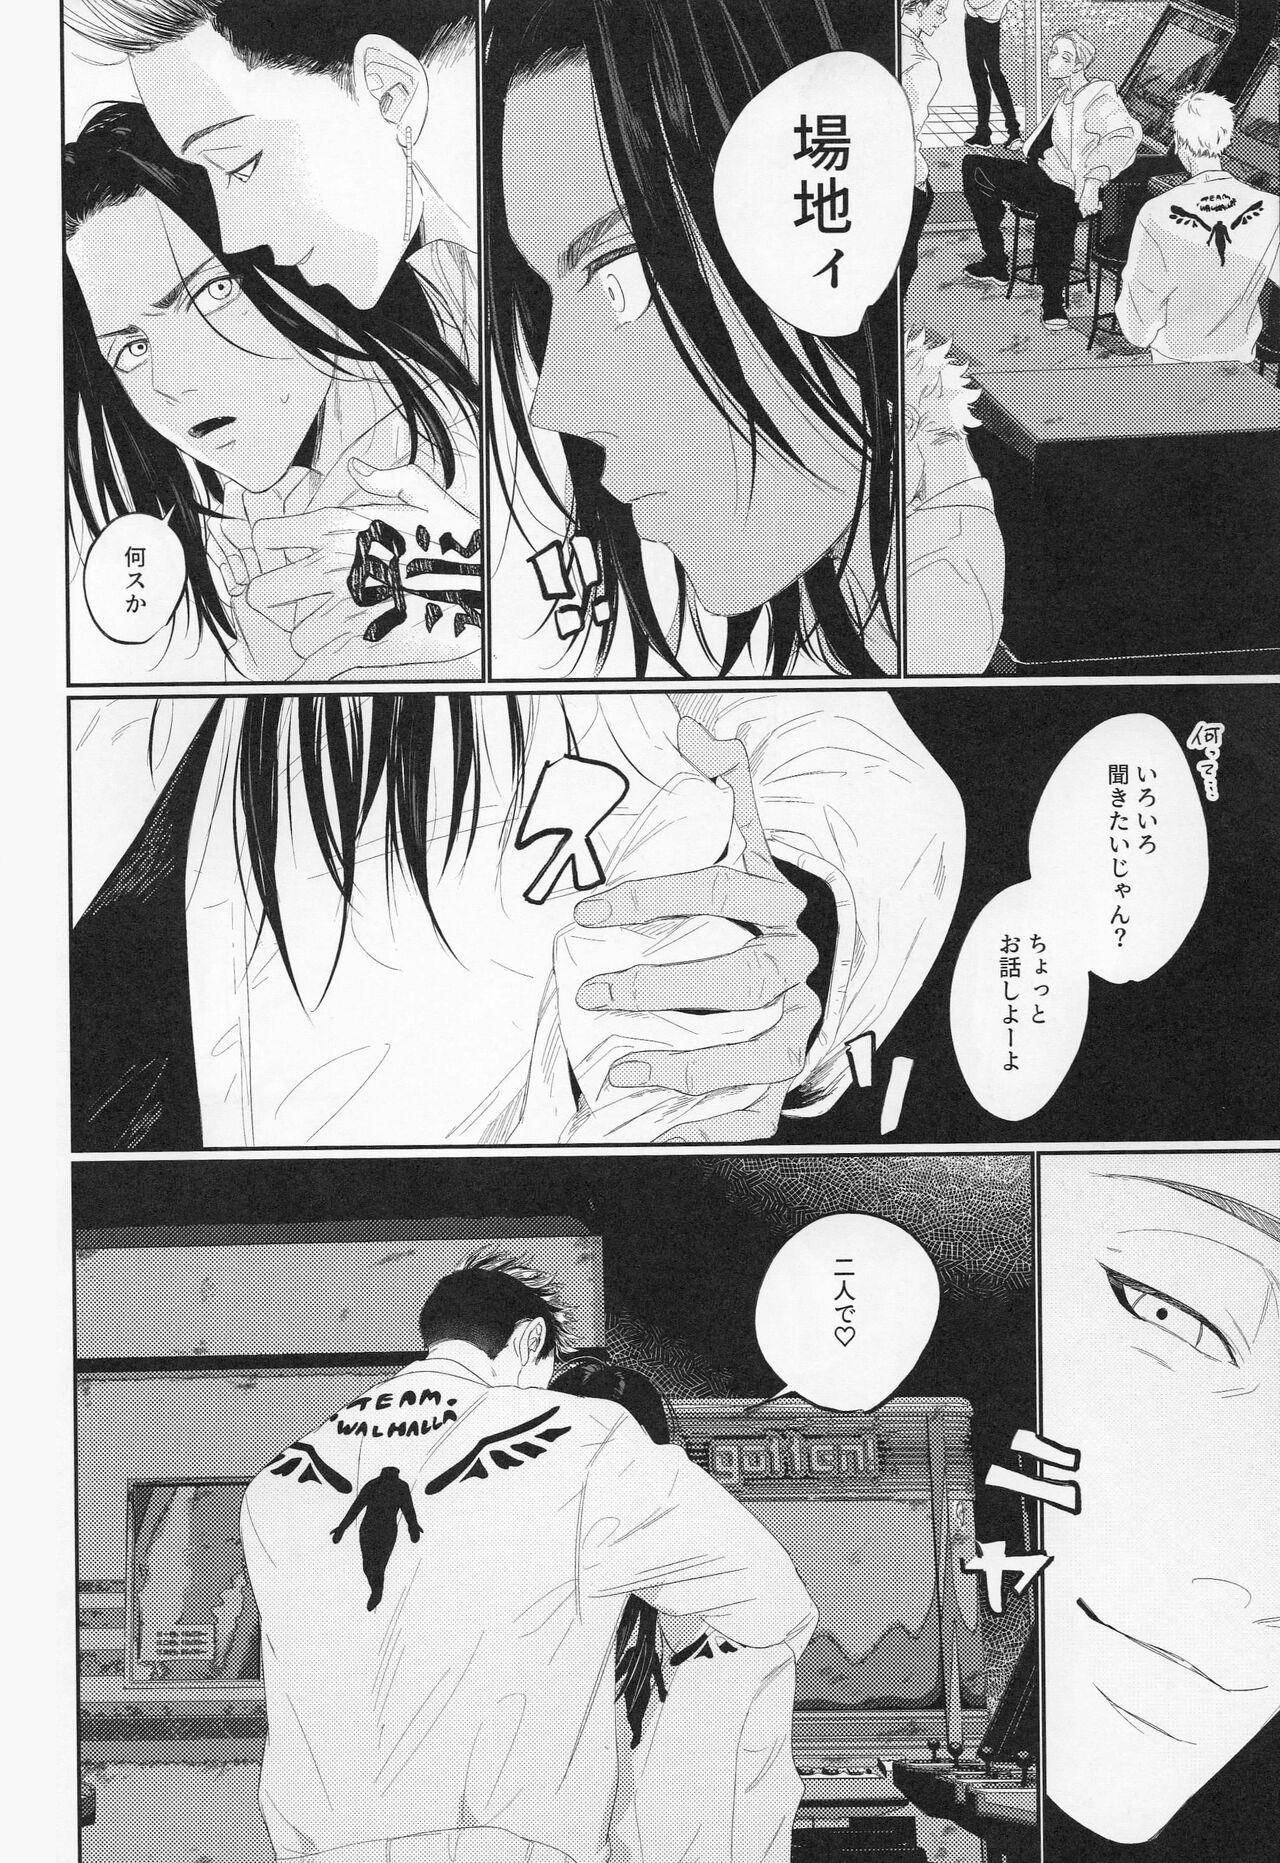 Hidden Camera Valhalla e Youkoso - Welcome to Valhalla - Tokyo revengers Best Blow Jobs Ever - Page 5